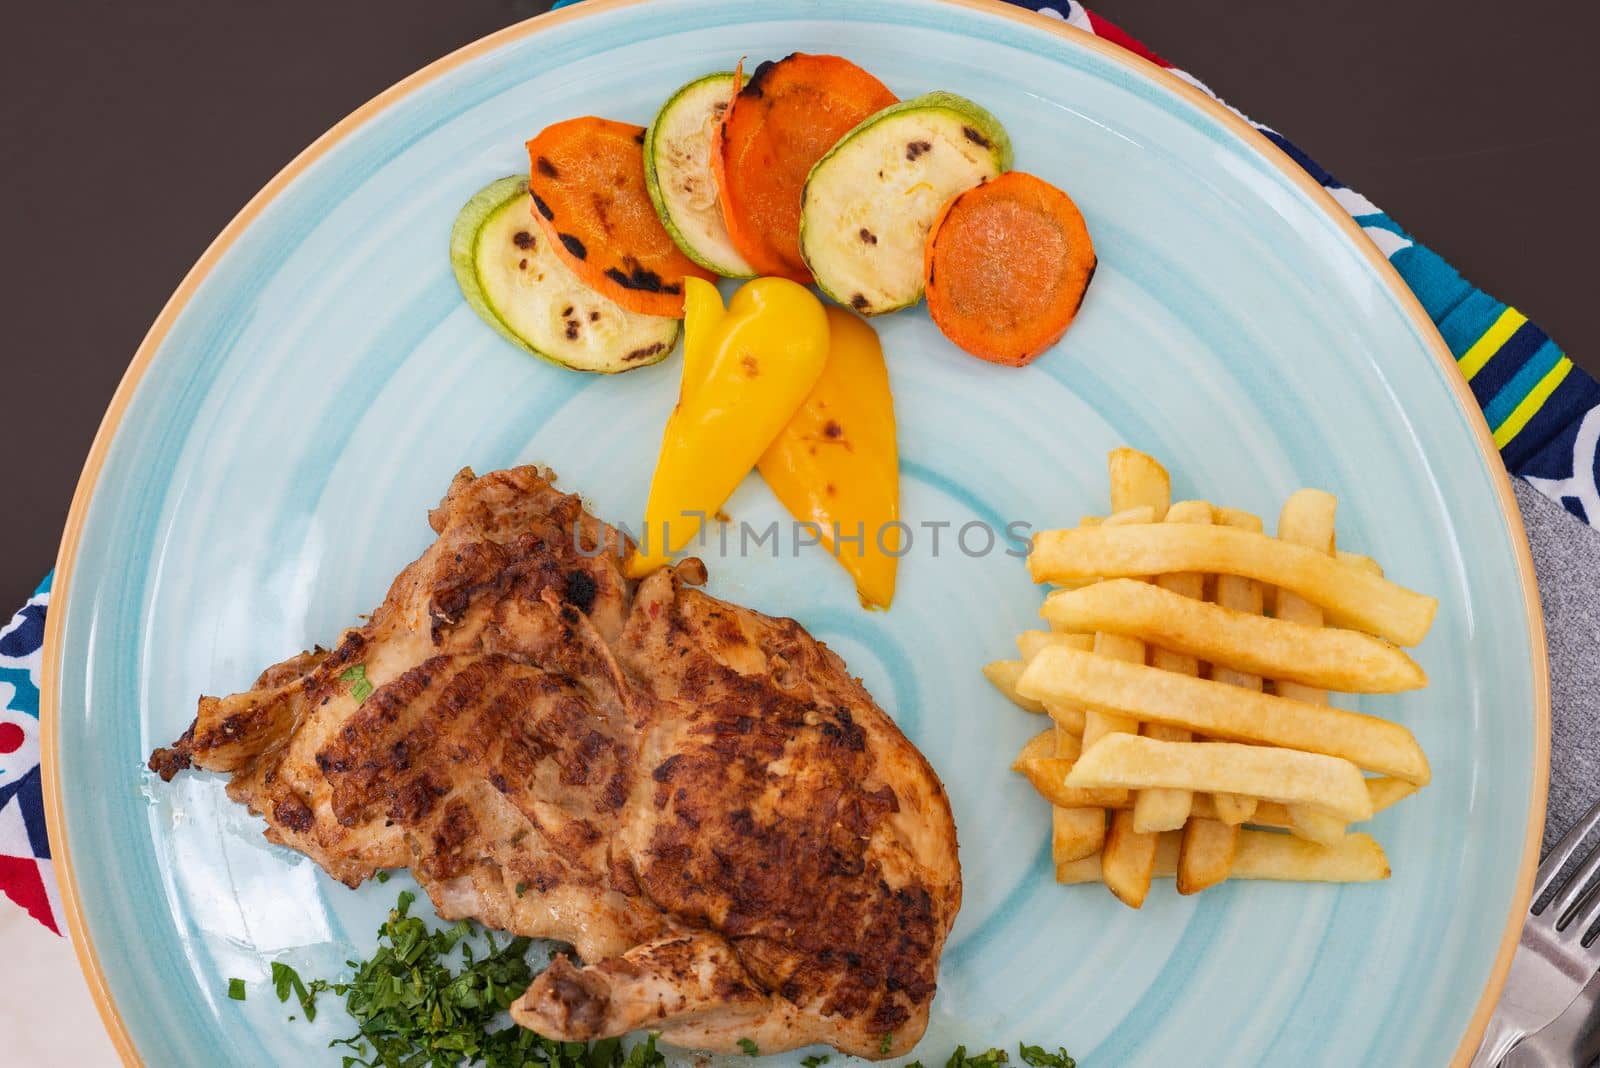 Beef steak a la carte meal with french fries chips and vegetables at restaurant table place setting